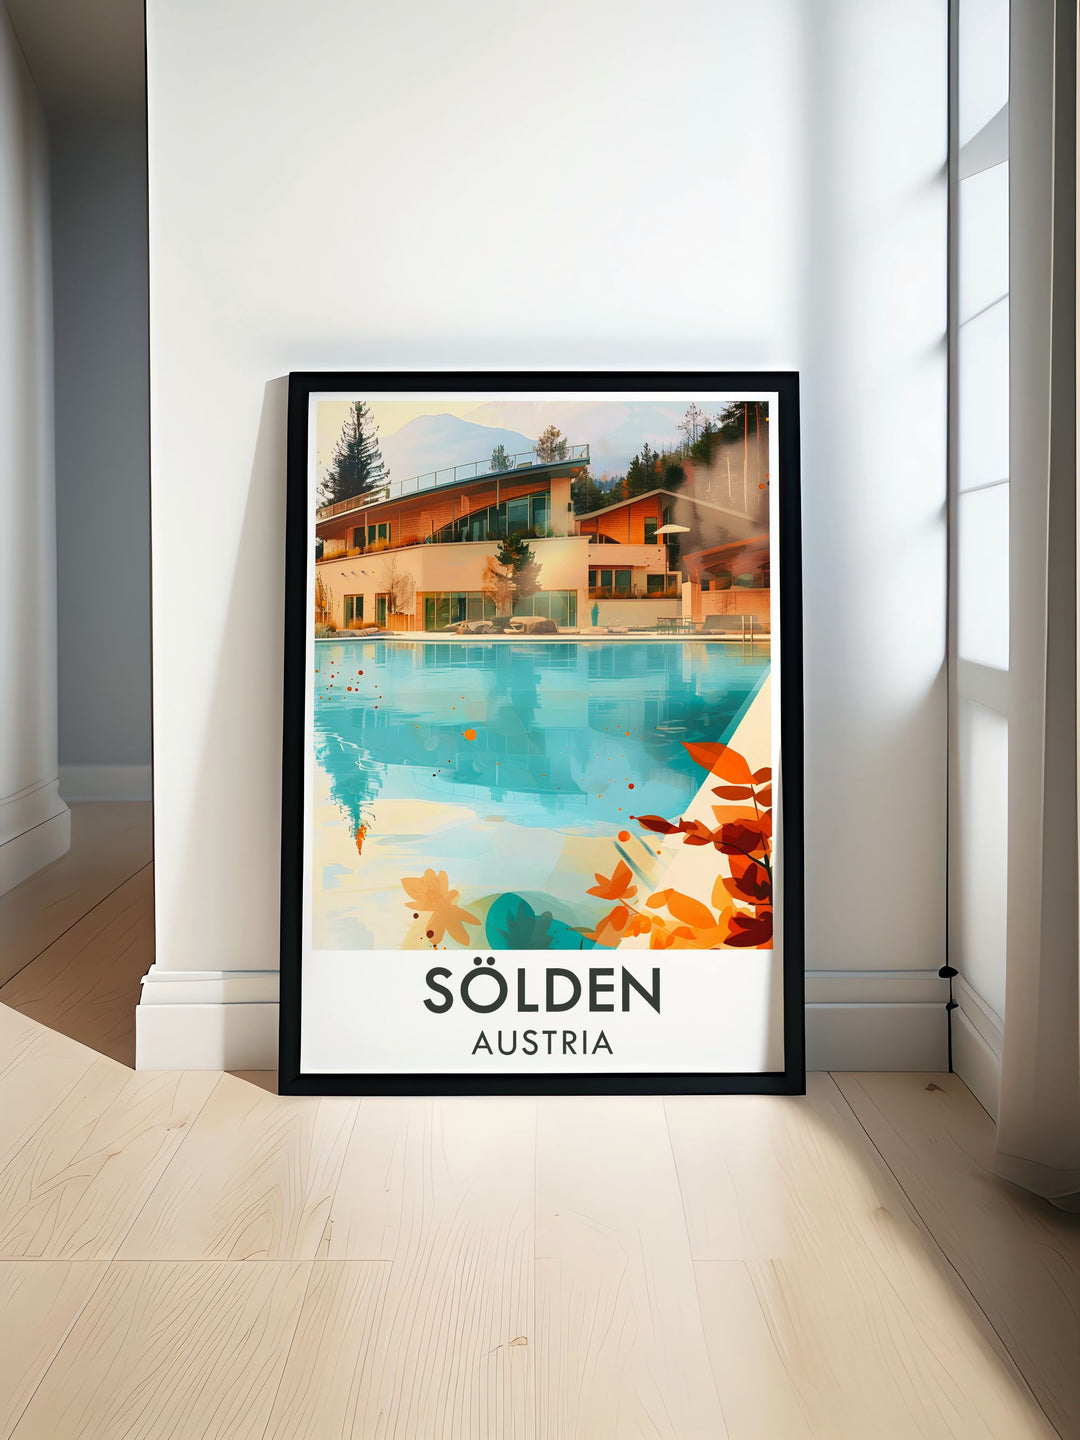 The picturesque Aqua Dome and the dynamic slopes of Solden Ski Resort are beautifully illustrated in this poster, offering a glimpse into the exhilarating experiences and scenic beauty of Austria.